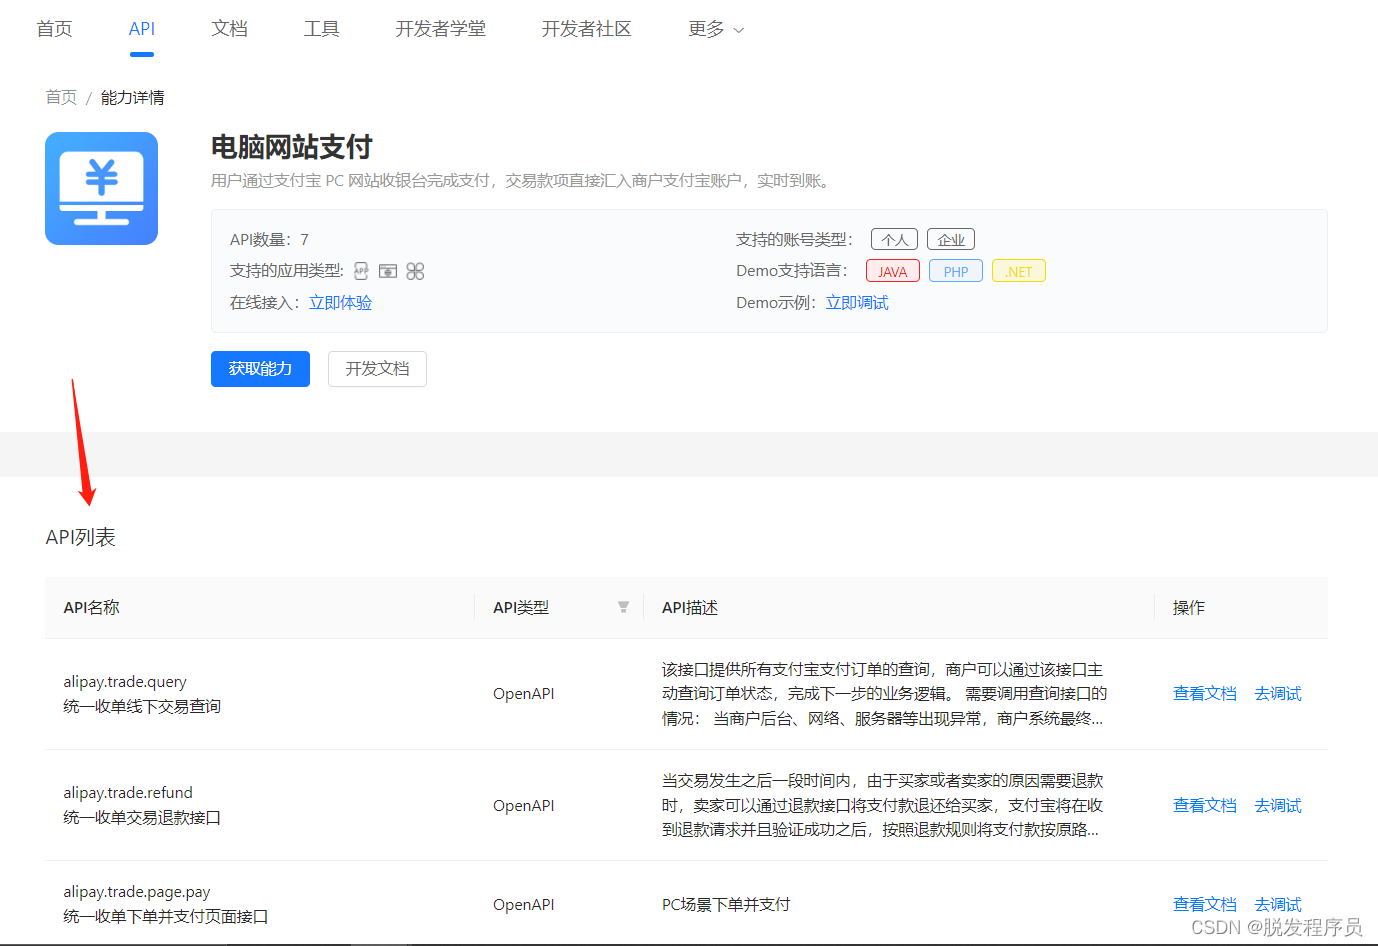 Node access to Alipay open platform sandbox to achieve payment function